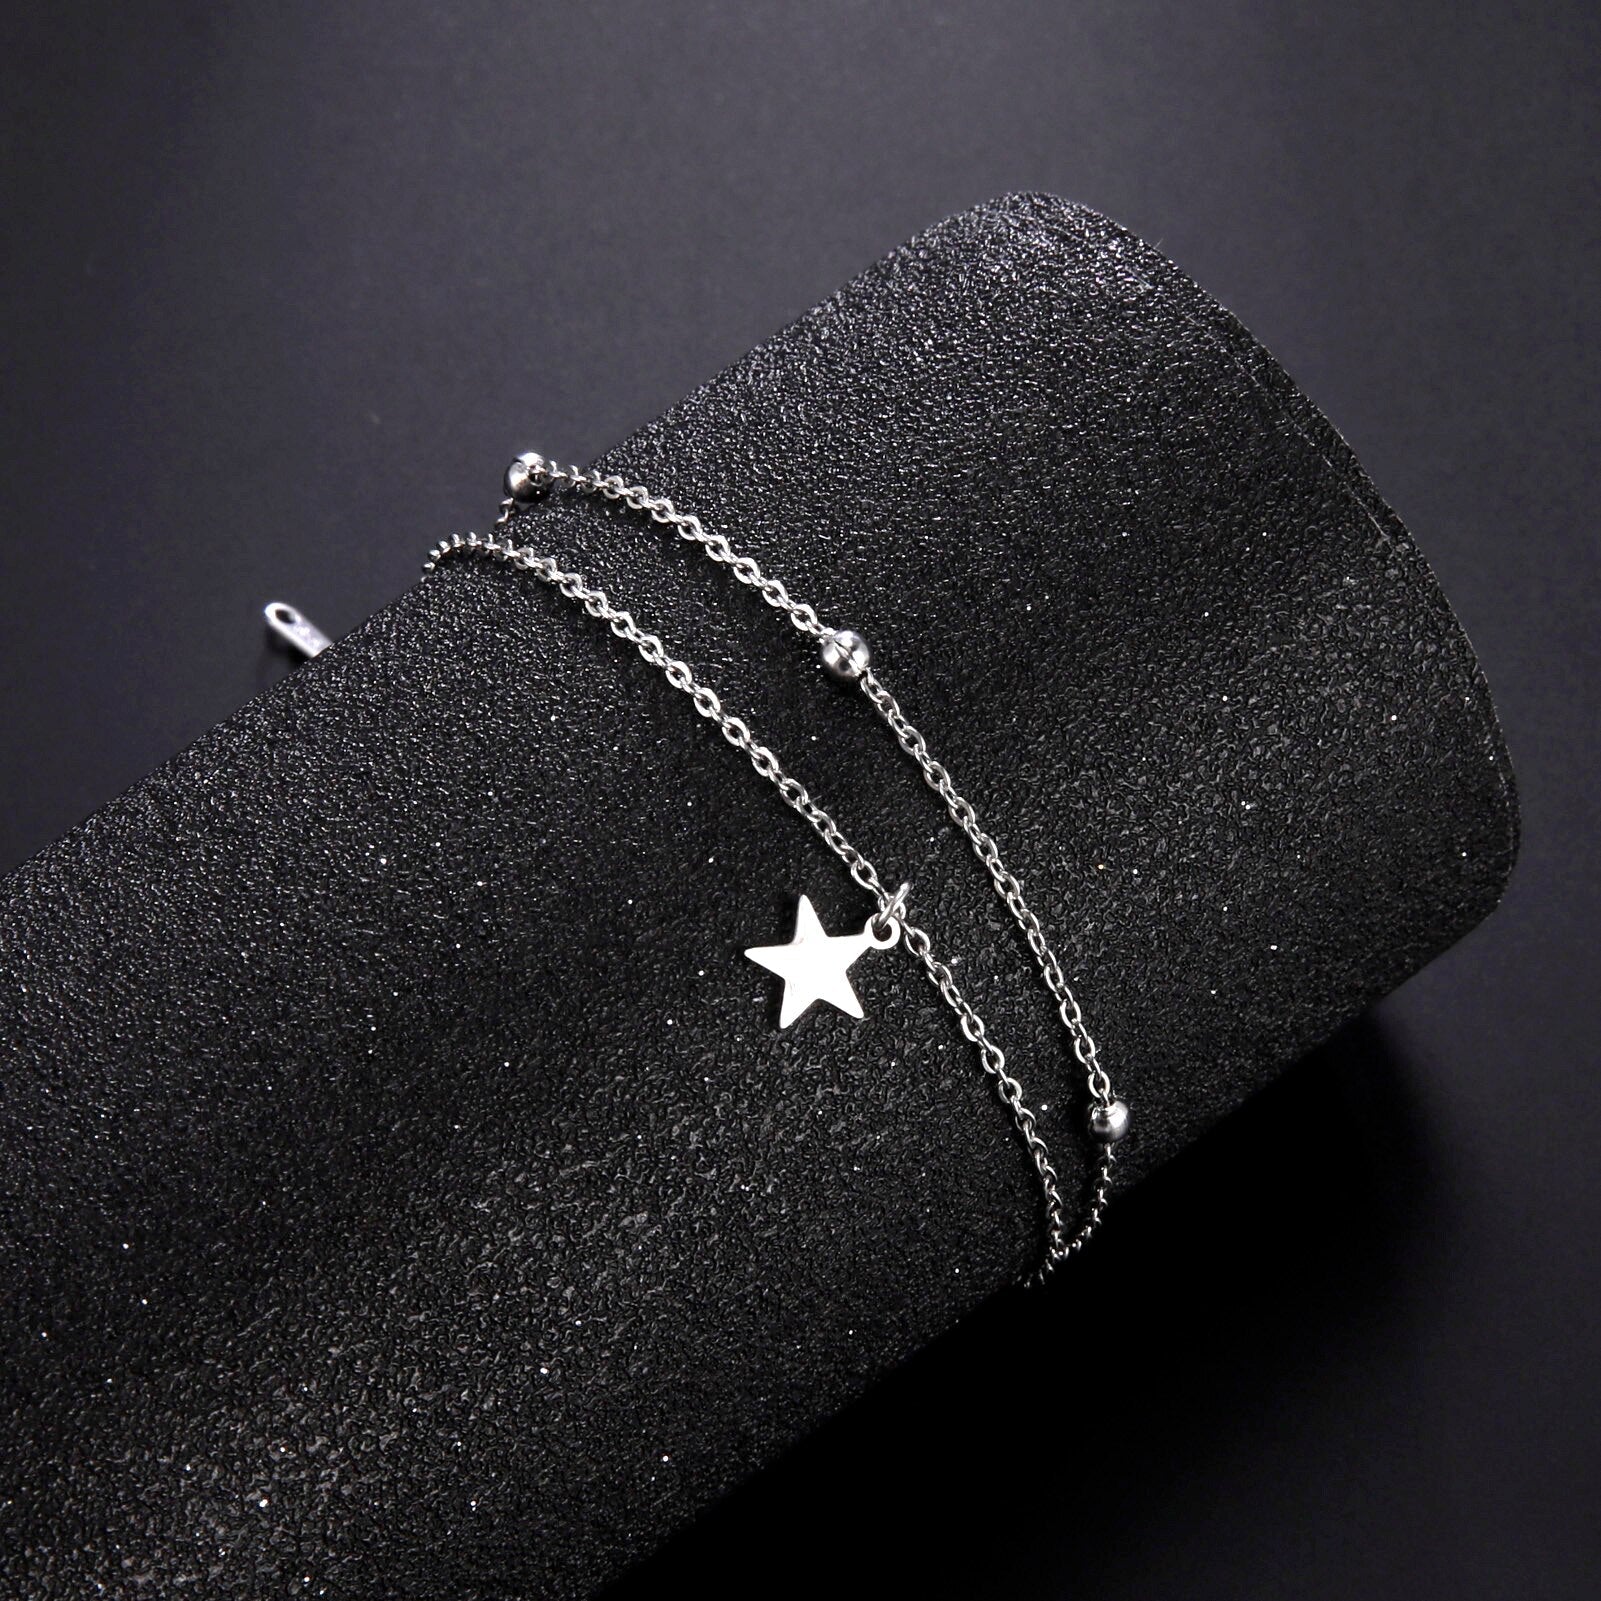 Star Anklet Silver - M&H FashionStar Anklet SilverM&H FashionM&H Fashion200001034:361180#Silver colorStar Anklet SilverM&H FashionM&H FashionThis Star Anklet Silver is the perfect accessory for any occasion. It features a simple yet exquisite design with a trendy star shape. Crafted from stainless steel, Star Anklet Silver